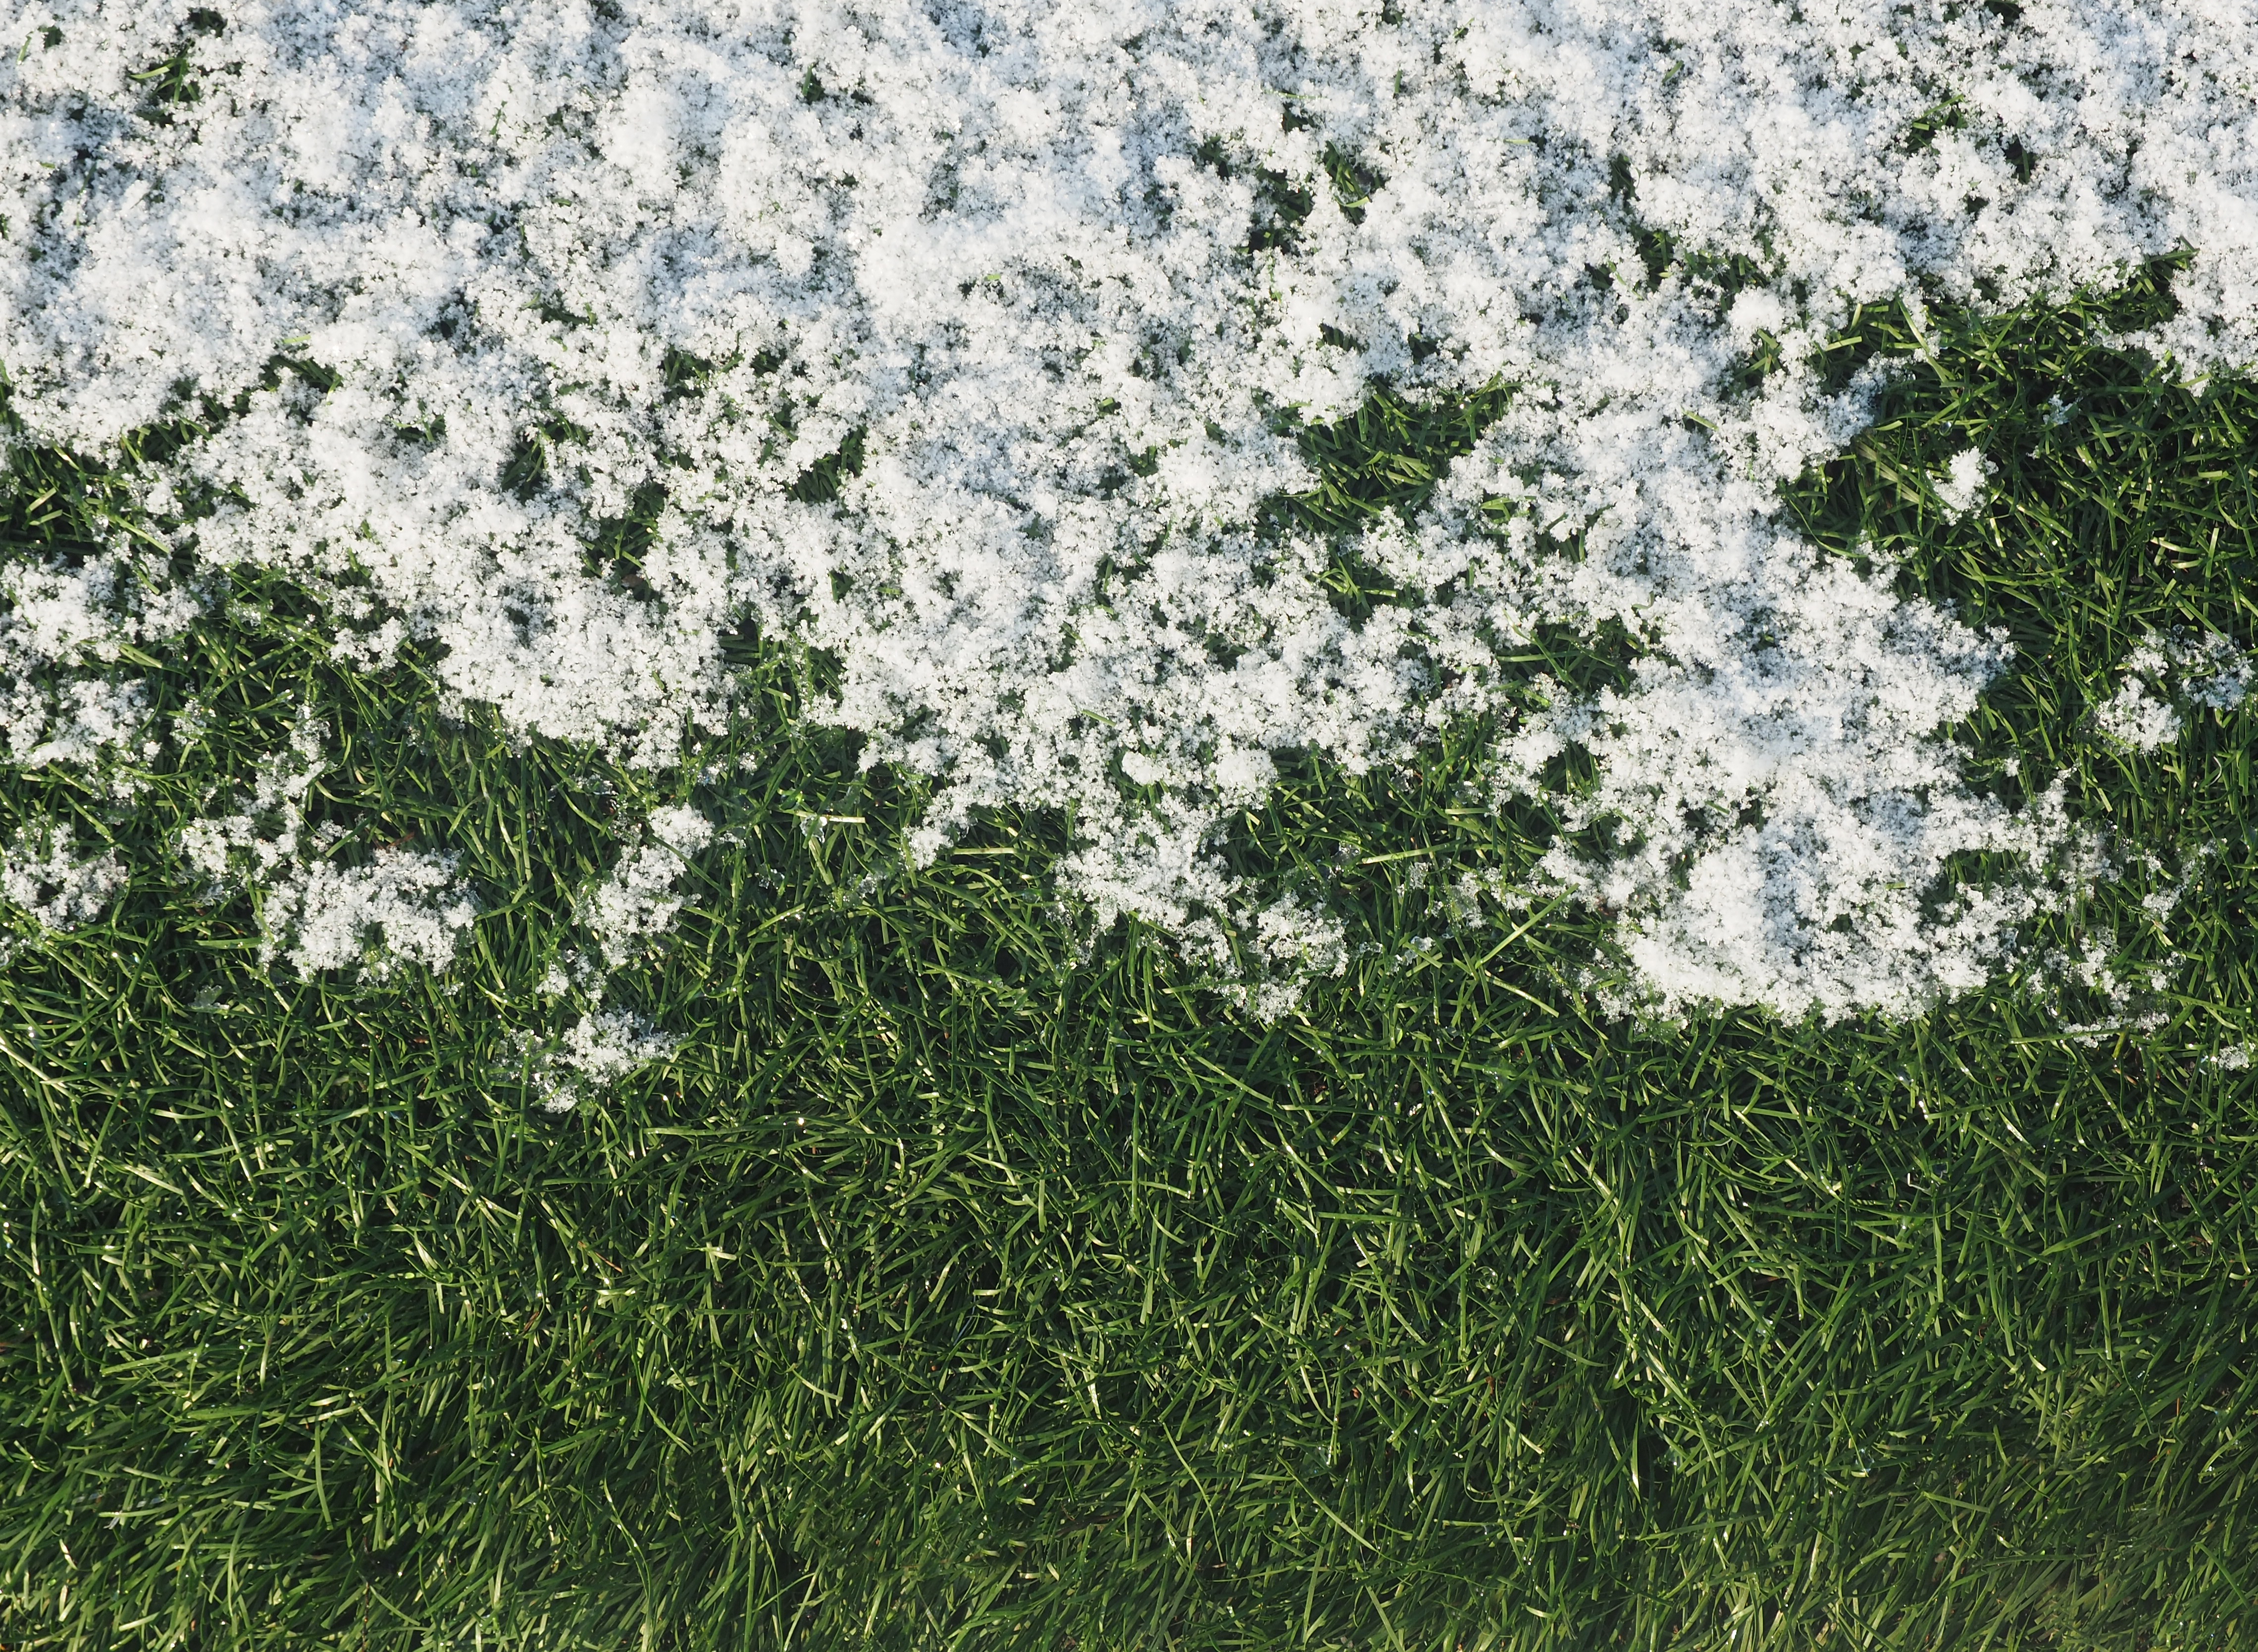 The optimal timing for fall fertilizer would be when the shoot growth of the turf stops and before the ground freezes. 